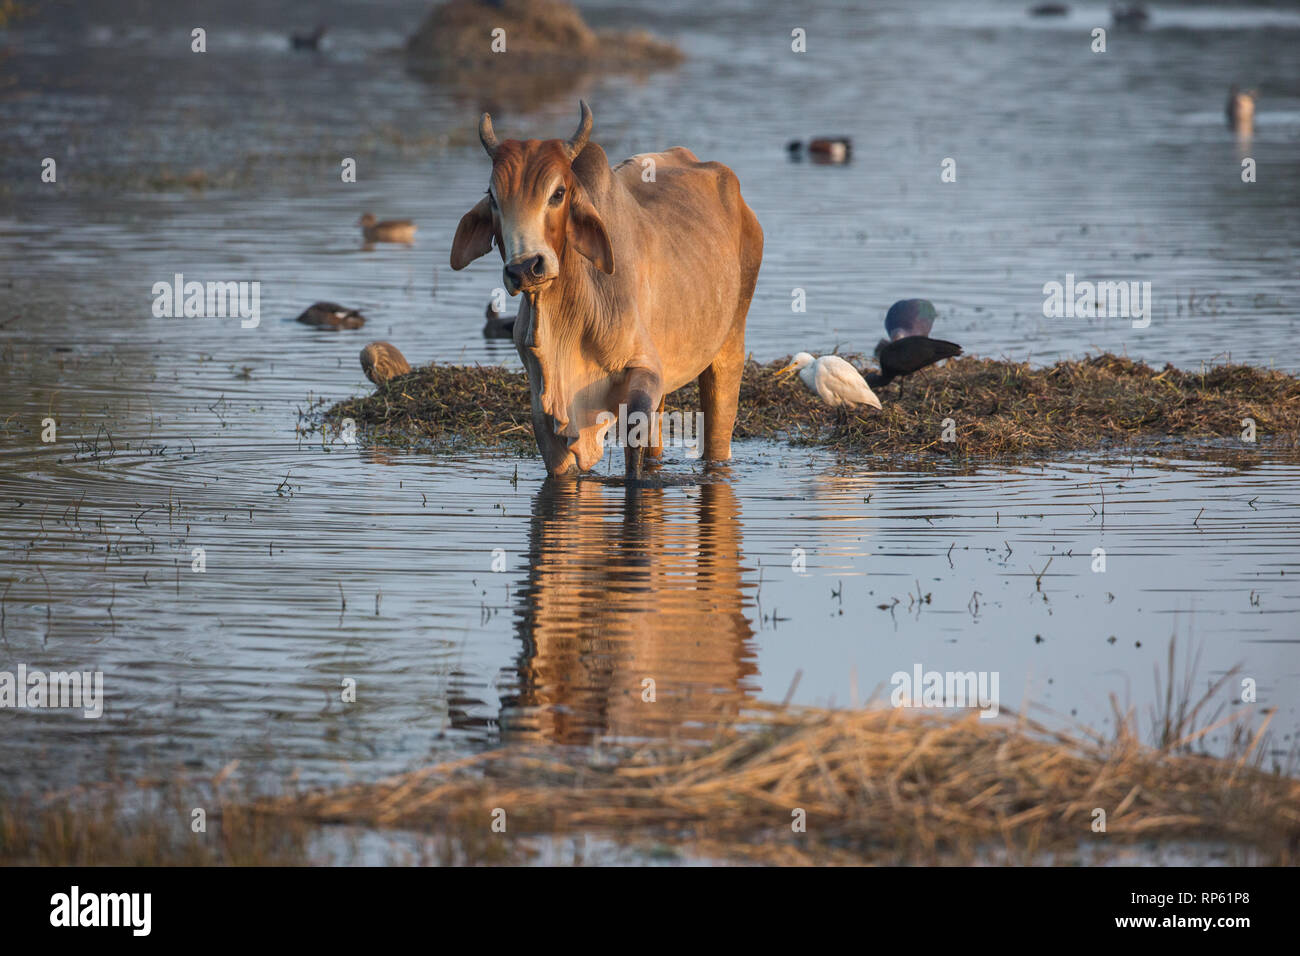 Zebu Cattle (Bos primigenius indicus). Wallowing through the shallows of Sultanpur Jeel wetland. Northern India. Many waterbirds present some gaining opportunity to catch disturbed invertebrate food items. Stock Photo